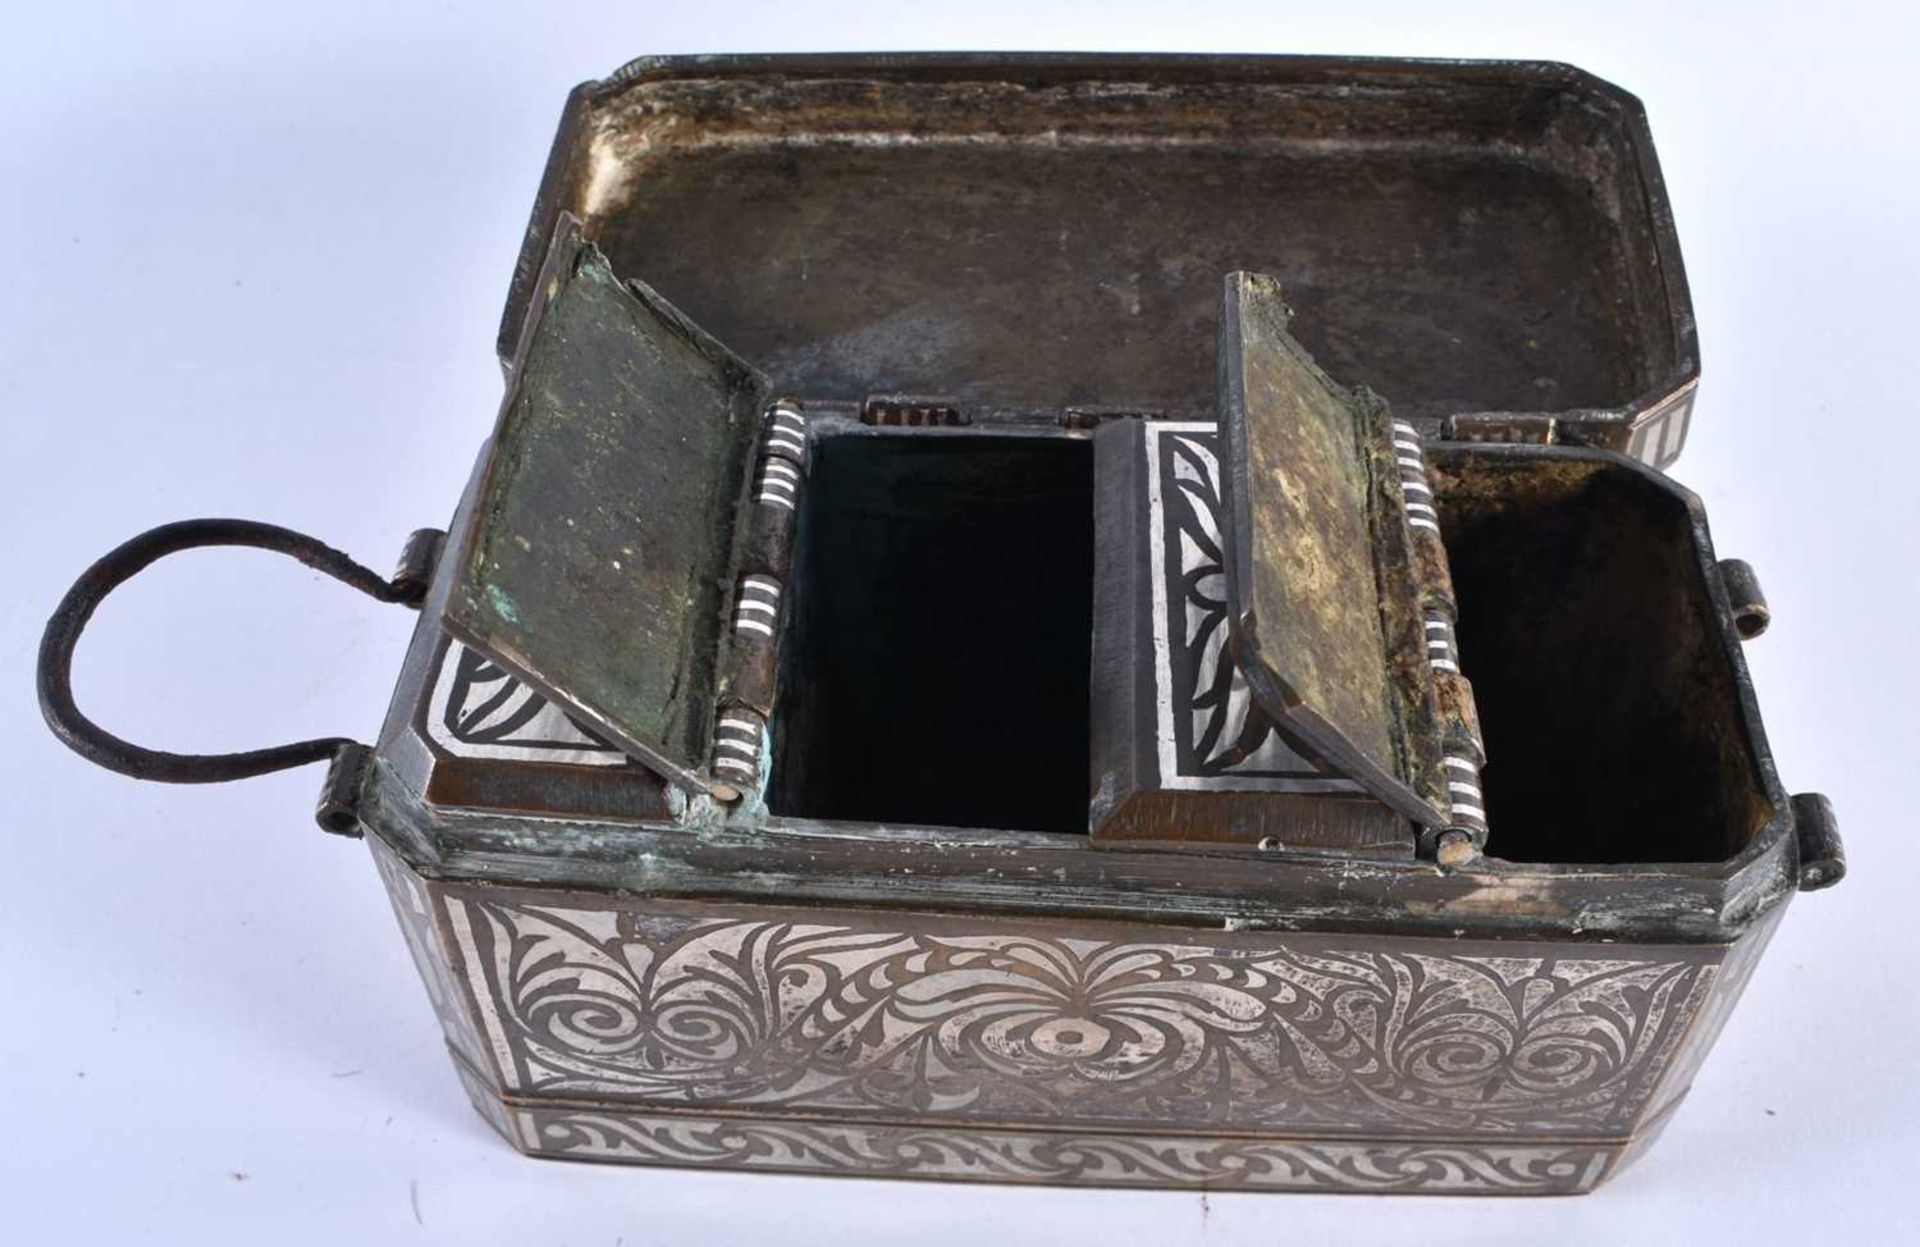 AN UNUSUAL 18TH CENTURY ISLAMIC PERSIAN SILVER INLAID BRONZE BOX decorative all over with foliage - Image 3 of 6